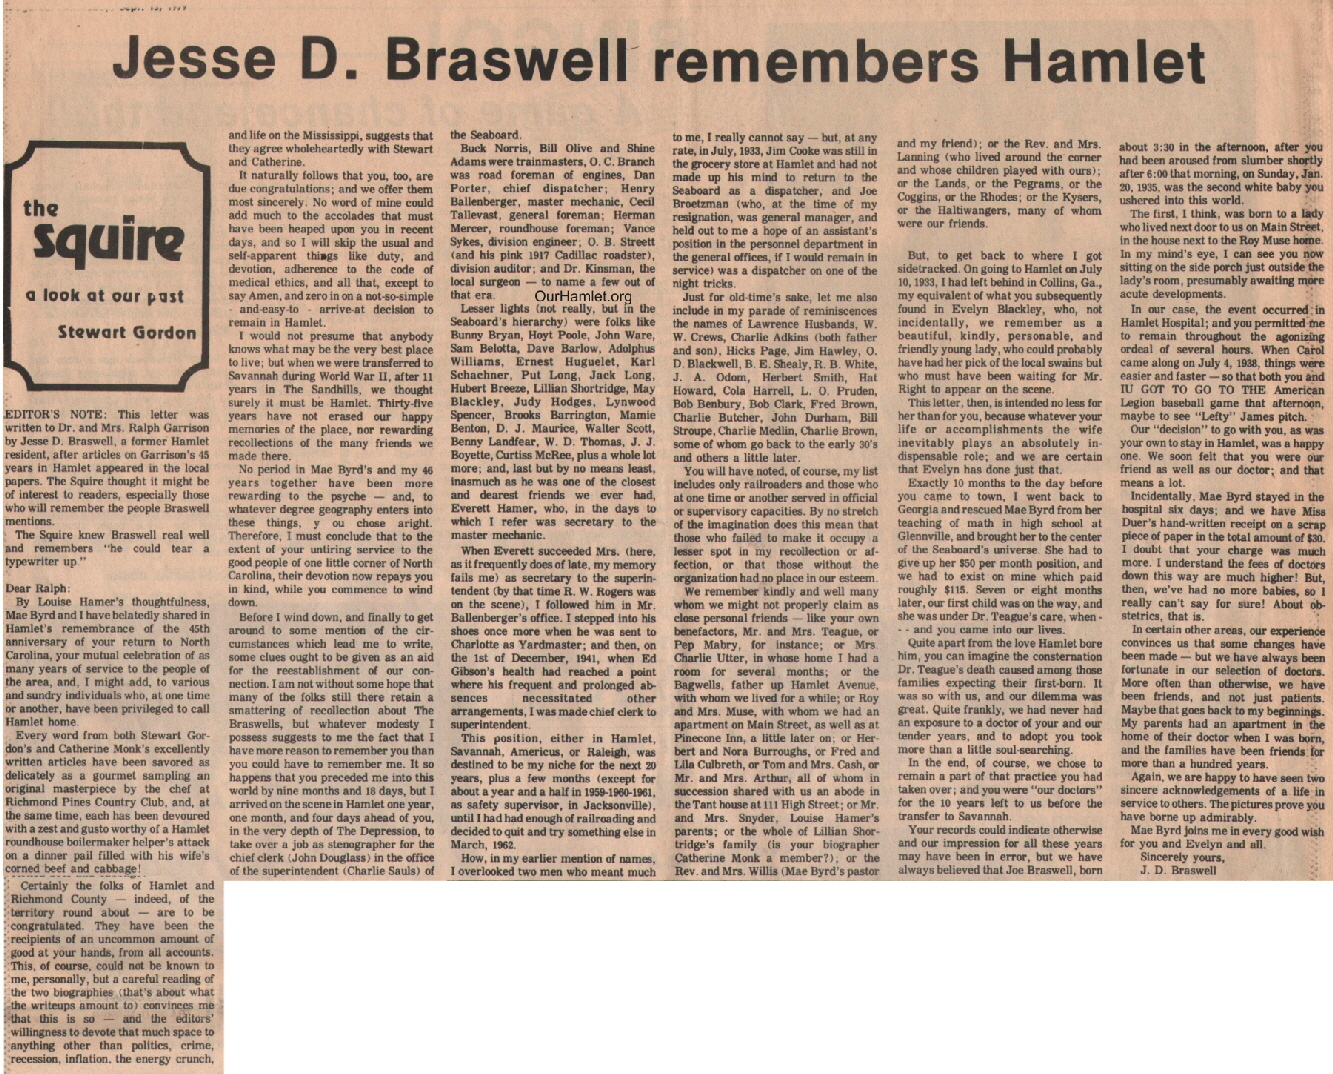 The Squire - Jesse D Braswell remembers Hamlet OH